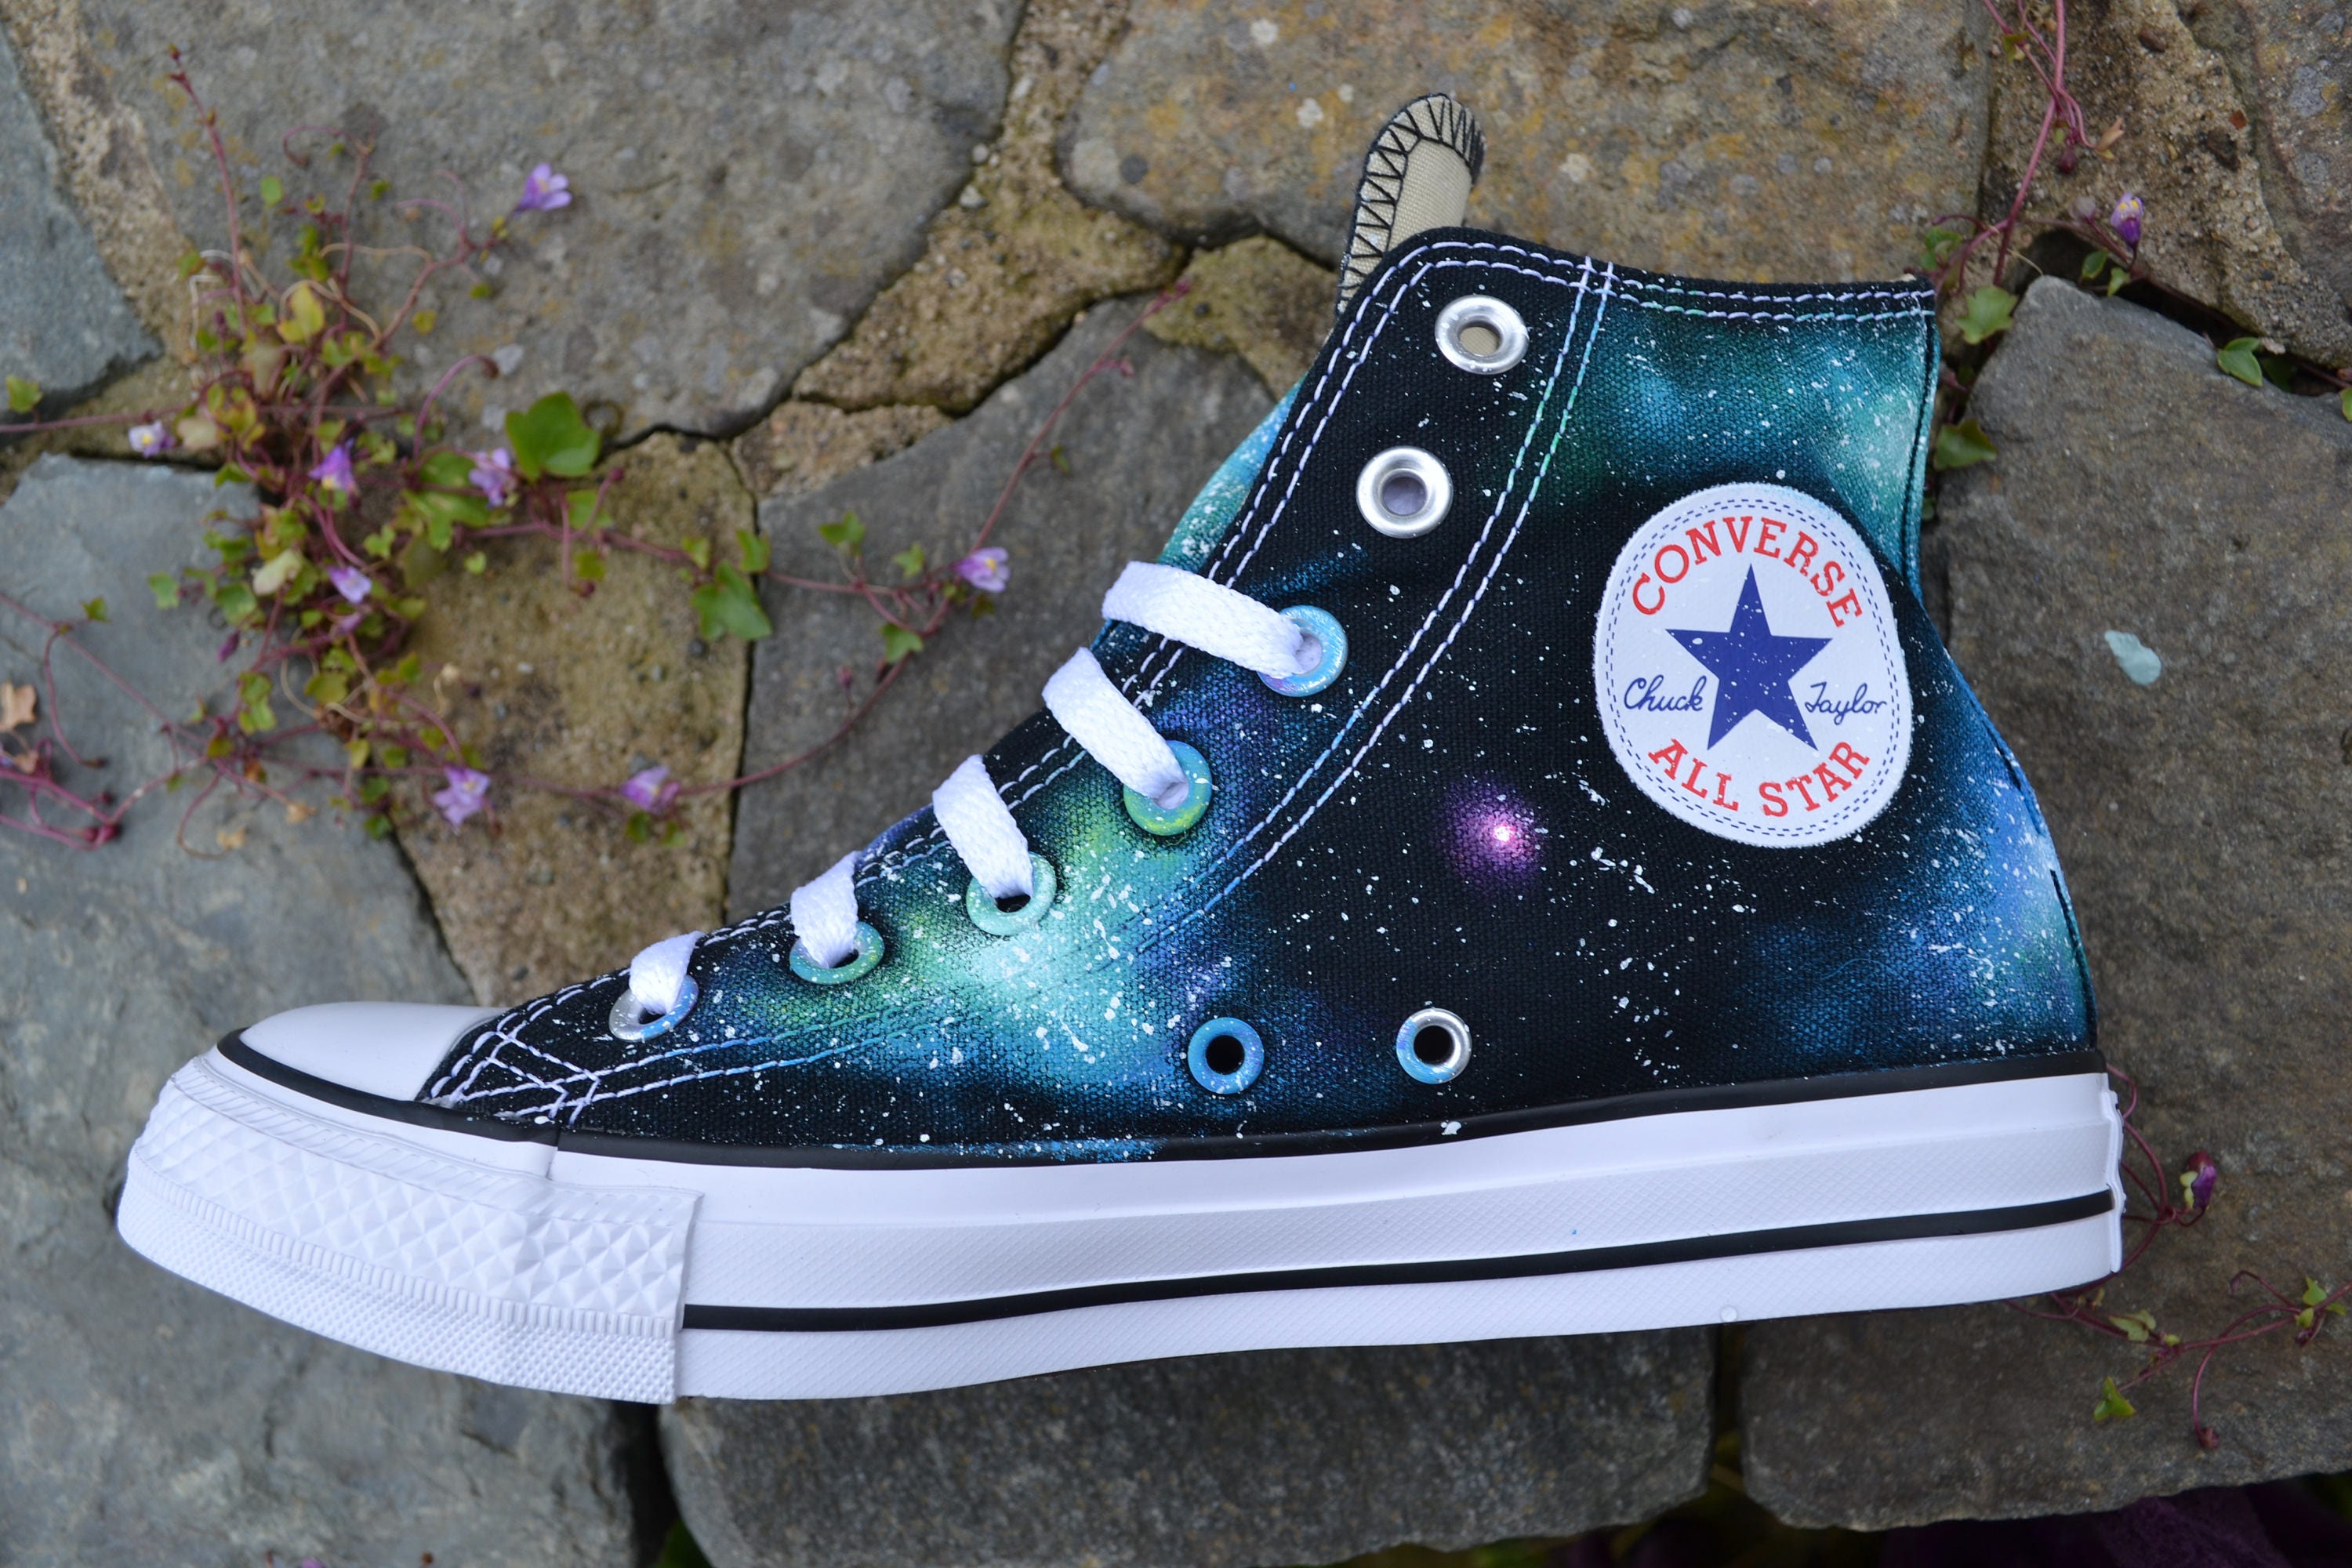 Blue Galaxy Sneakers Galaxy Converse Space Sneakers Nebula - Etsy